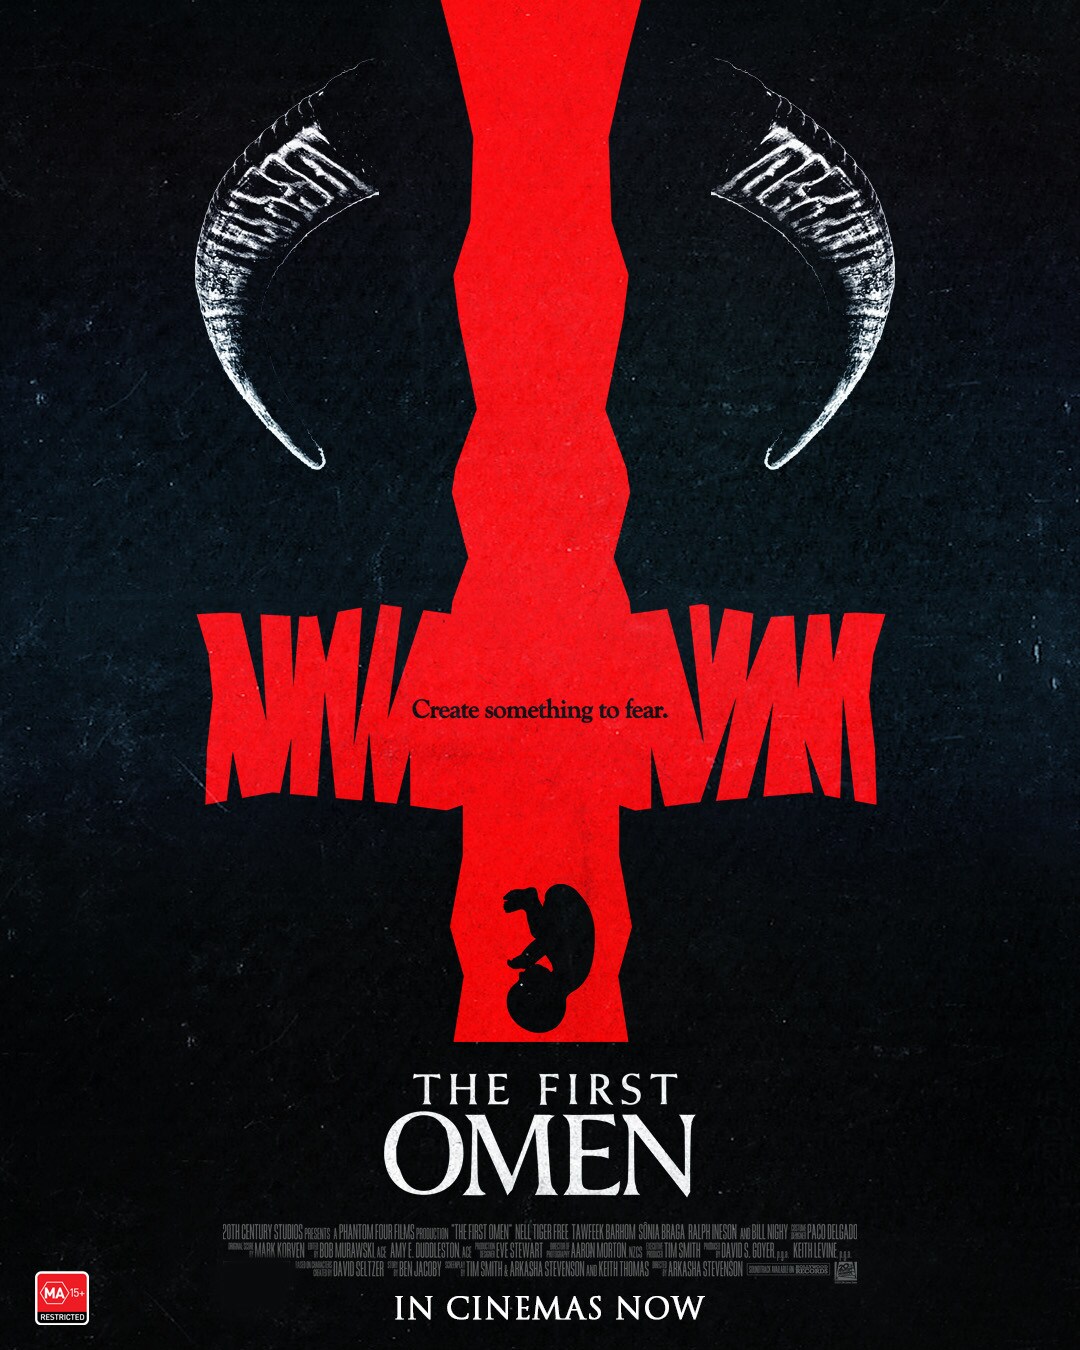 The First Omen movie payoff poster 2